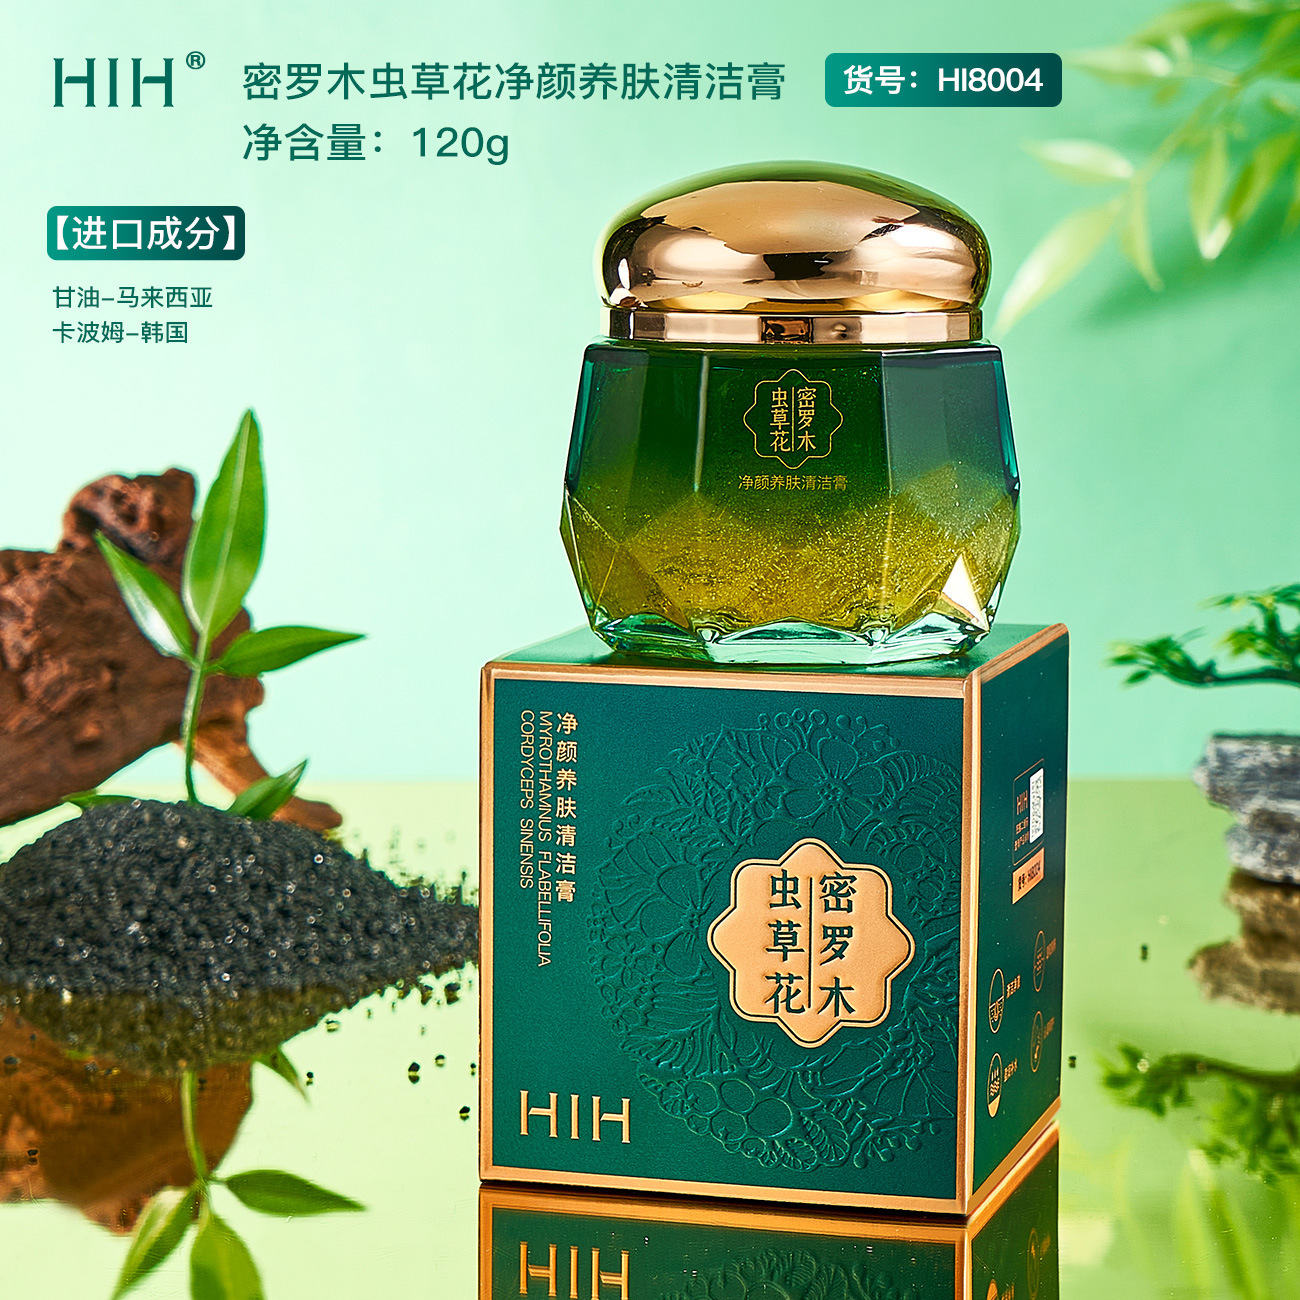 HIH Milomu Cordyceps Flower Cleansing Skin Care Cleaning Cream Moisturizing Hydrating Deep Cleansing Pores Facial Care